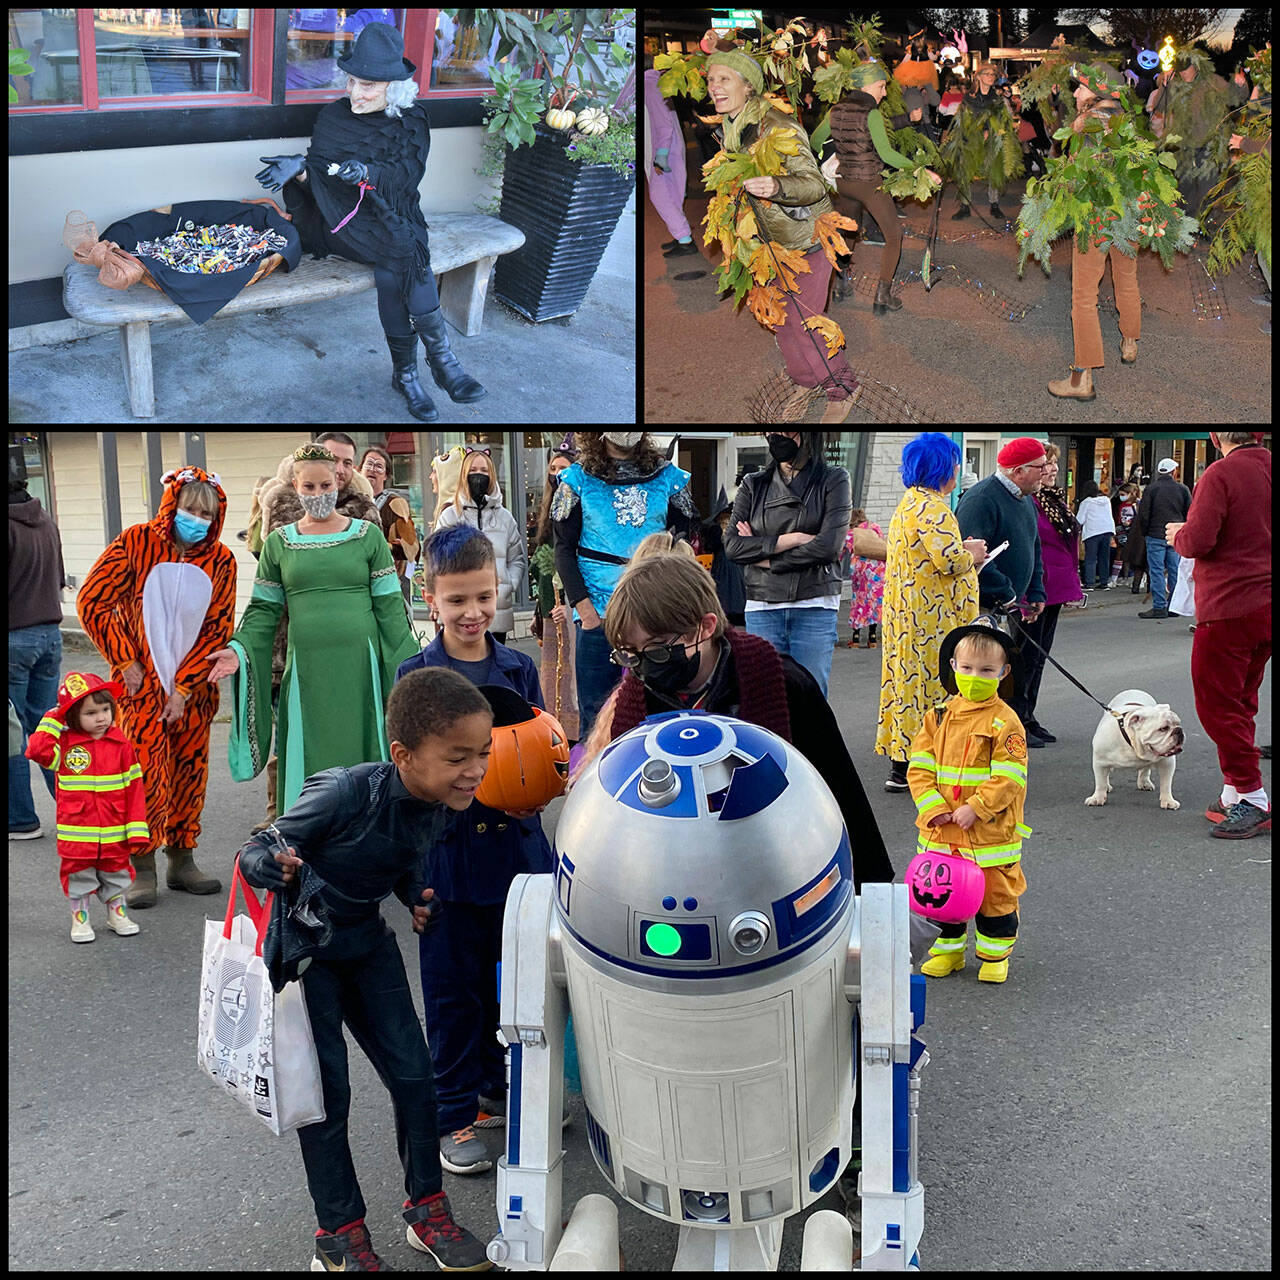 Tom Hughes (bottom) and Jim Diers (top) Photos
Scenes from a Halloween night on Vashon: costumed kids swarmed a roving R2D2, business owners dressed up to deliver candy to swarms of trick-or-treaters, and a raucous street dance broke out after sunset.